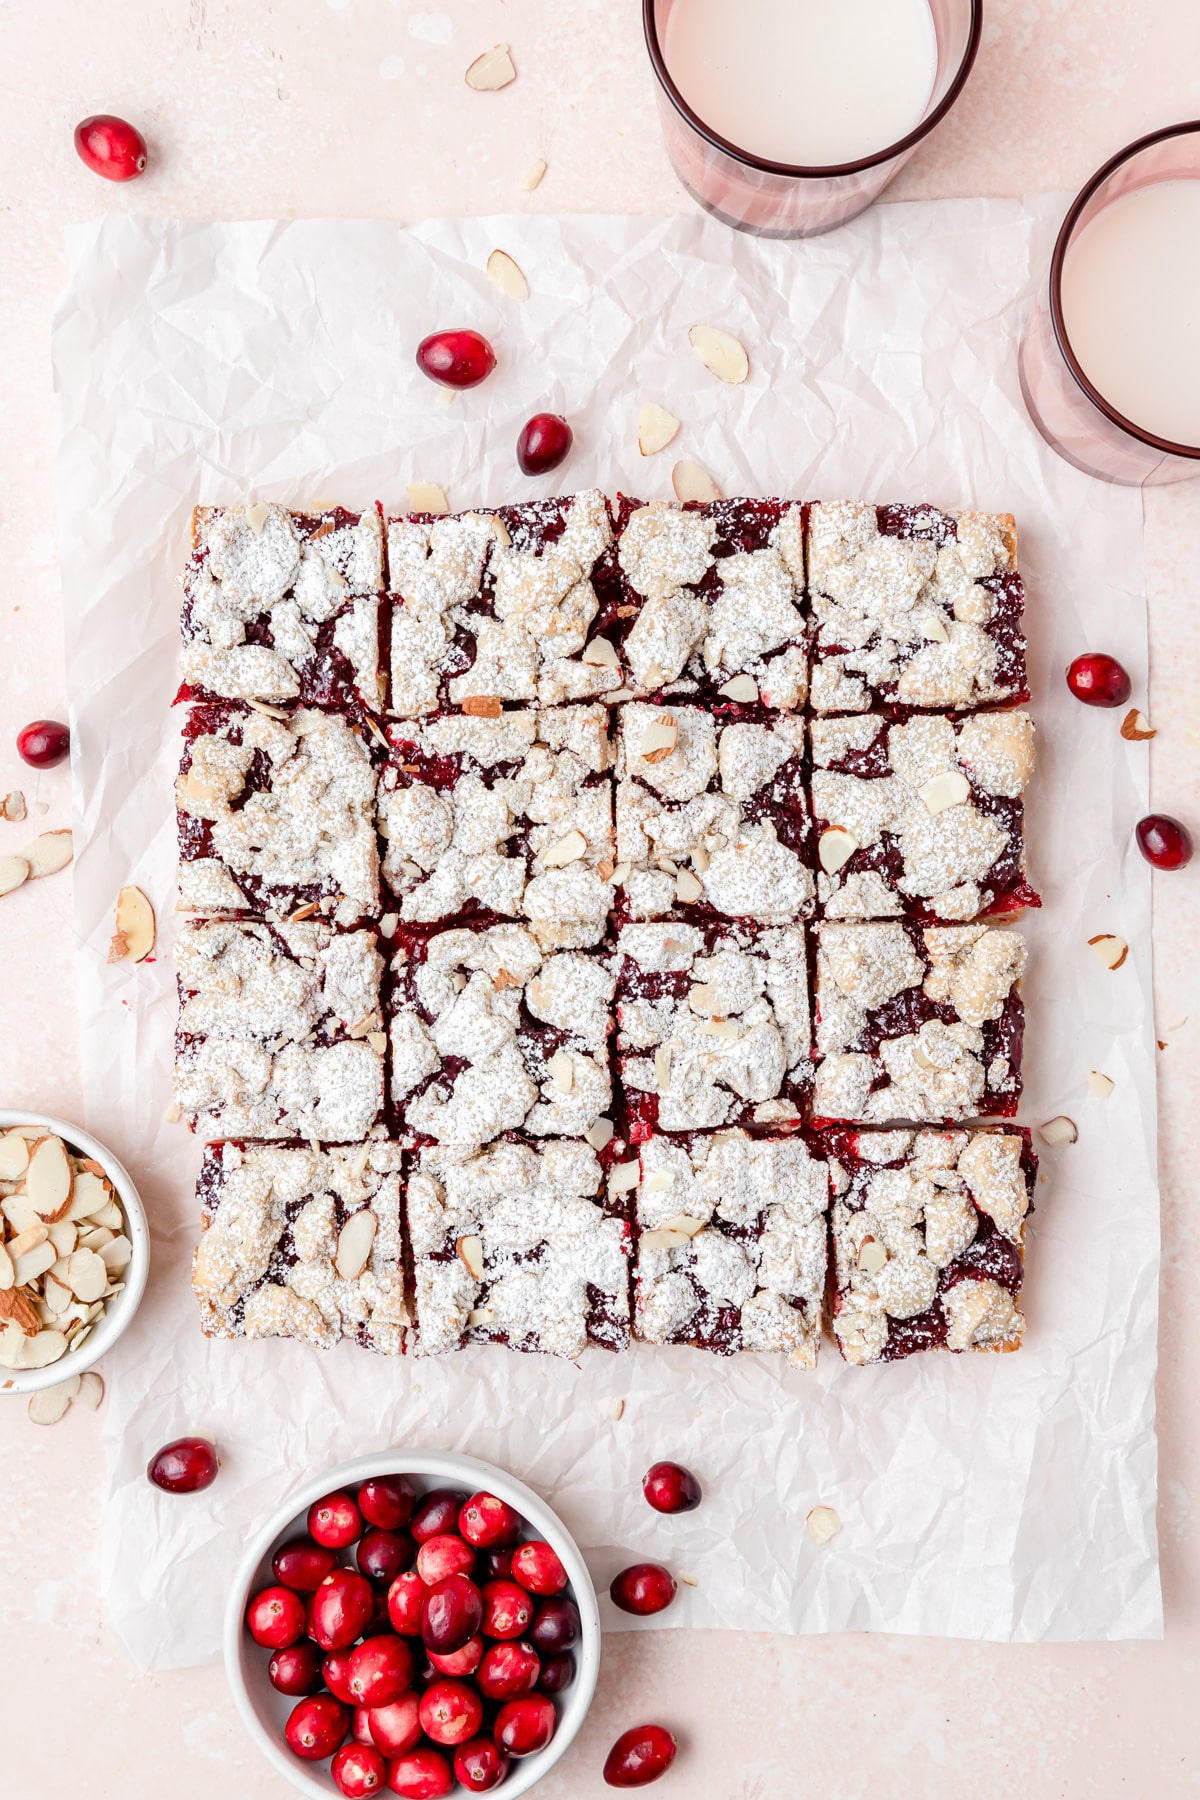 cranberry crumble bars after baking with powdered sugar dusted on top.